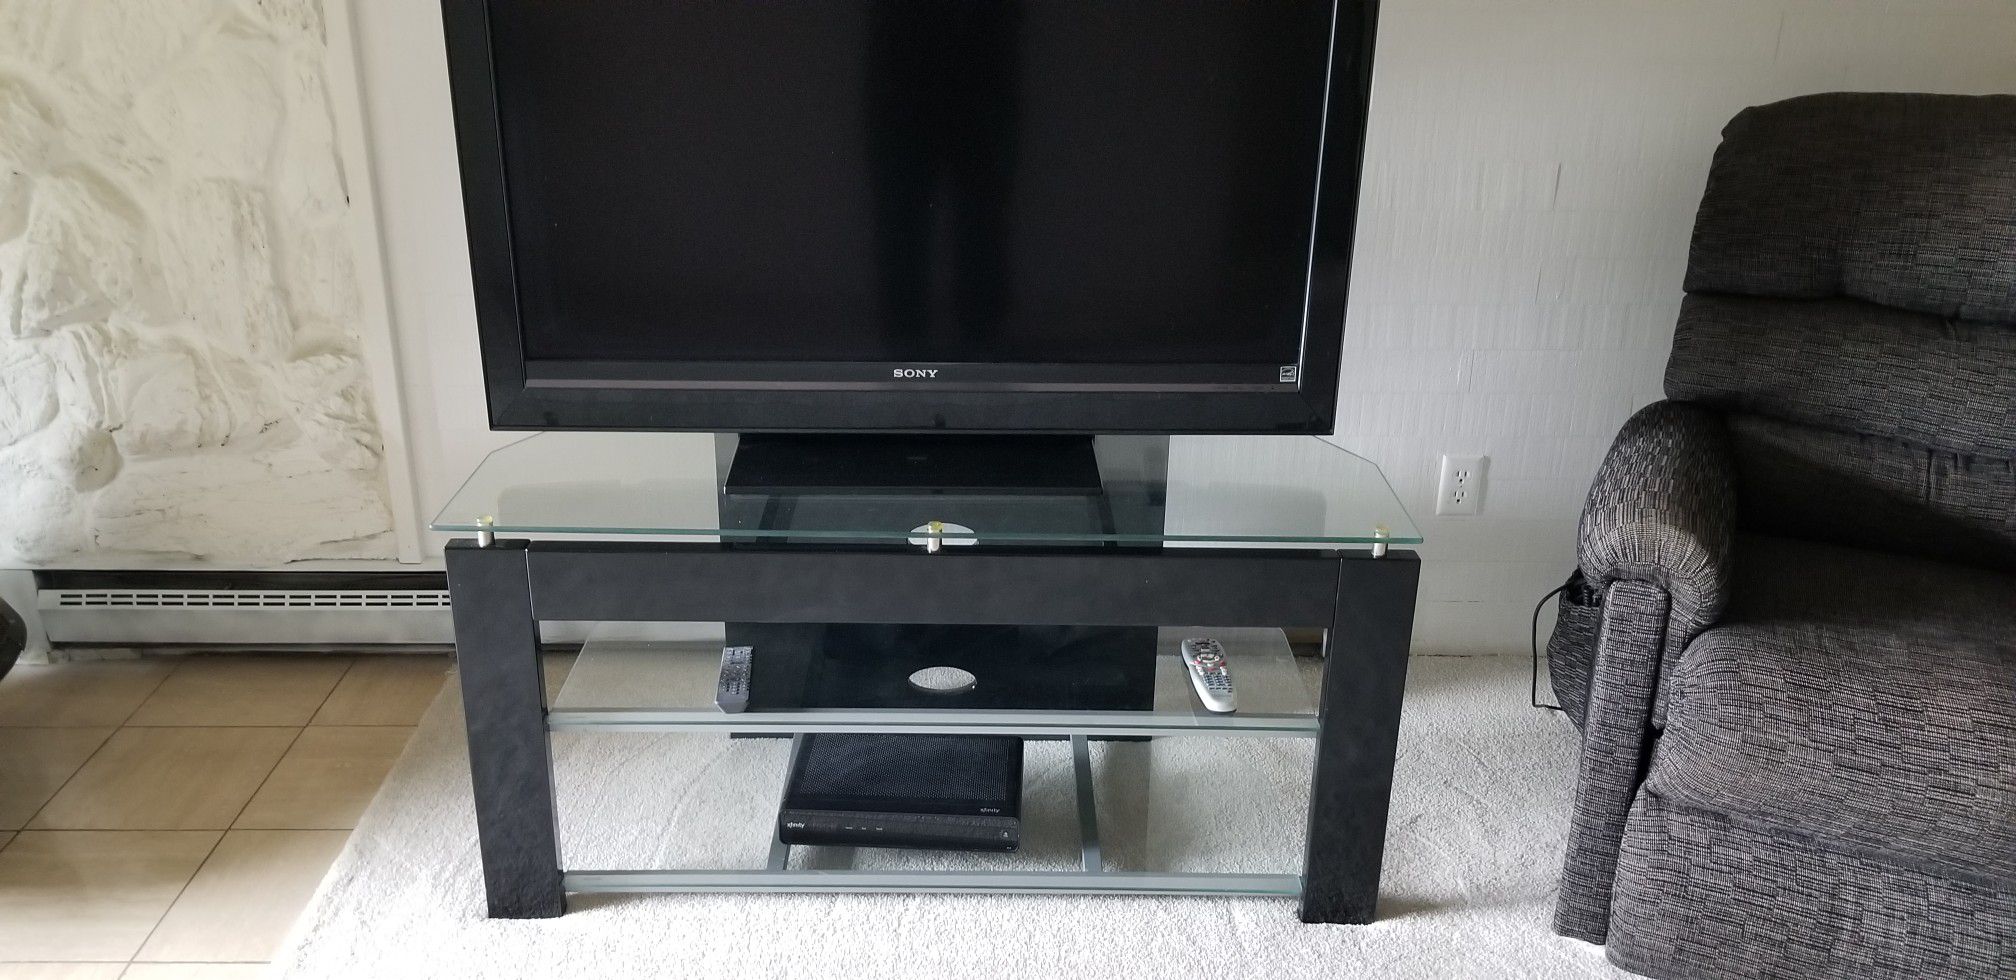 46 inch Sony Bravia with TV stand